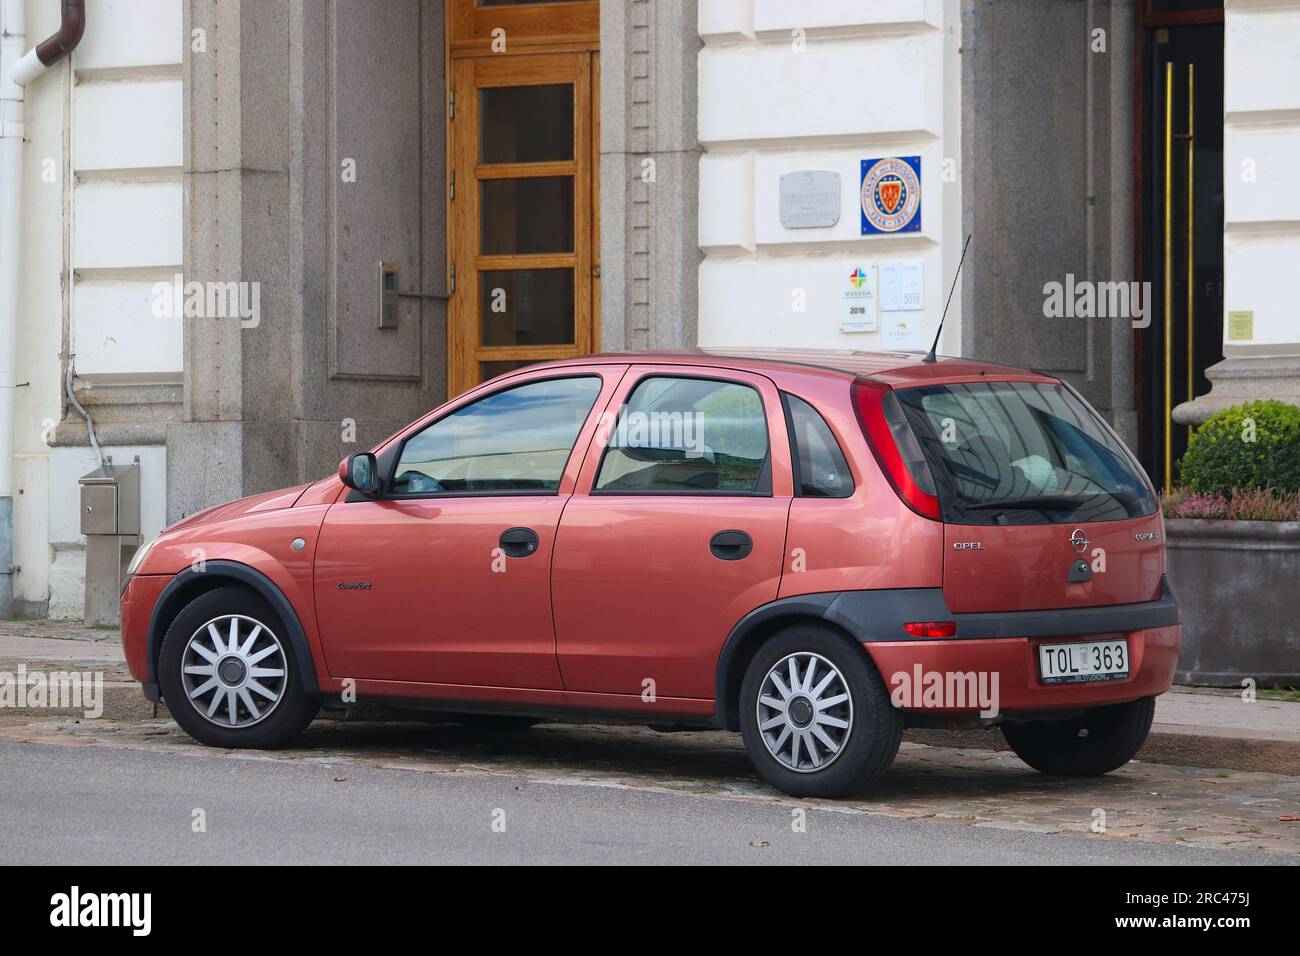 GOTHENBURG, SWEDEN - AUGUST 26, 2018: Opel Corsa small hatchback car parked in Gothenburg, Sweden. There are 4.8 million passenger cars registered in Stock Photo